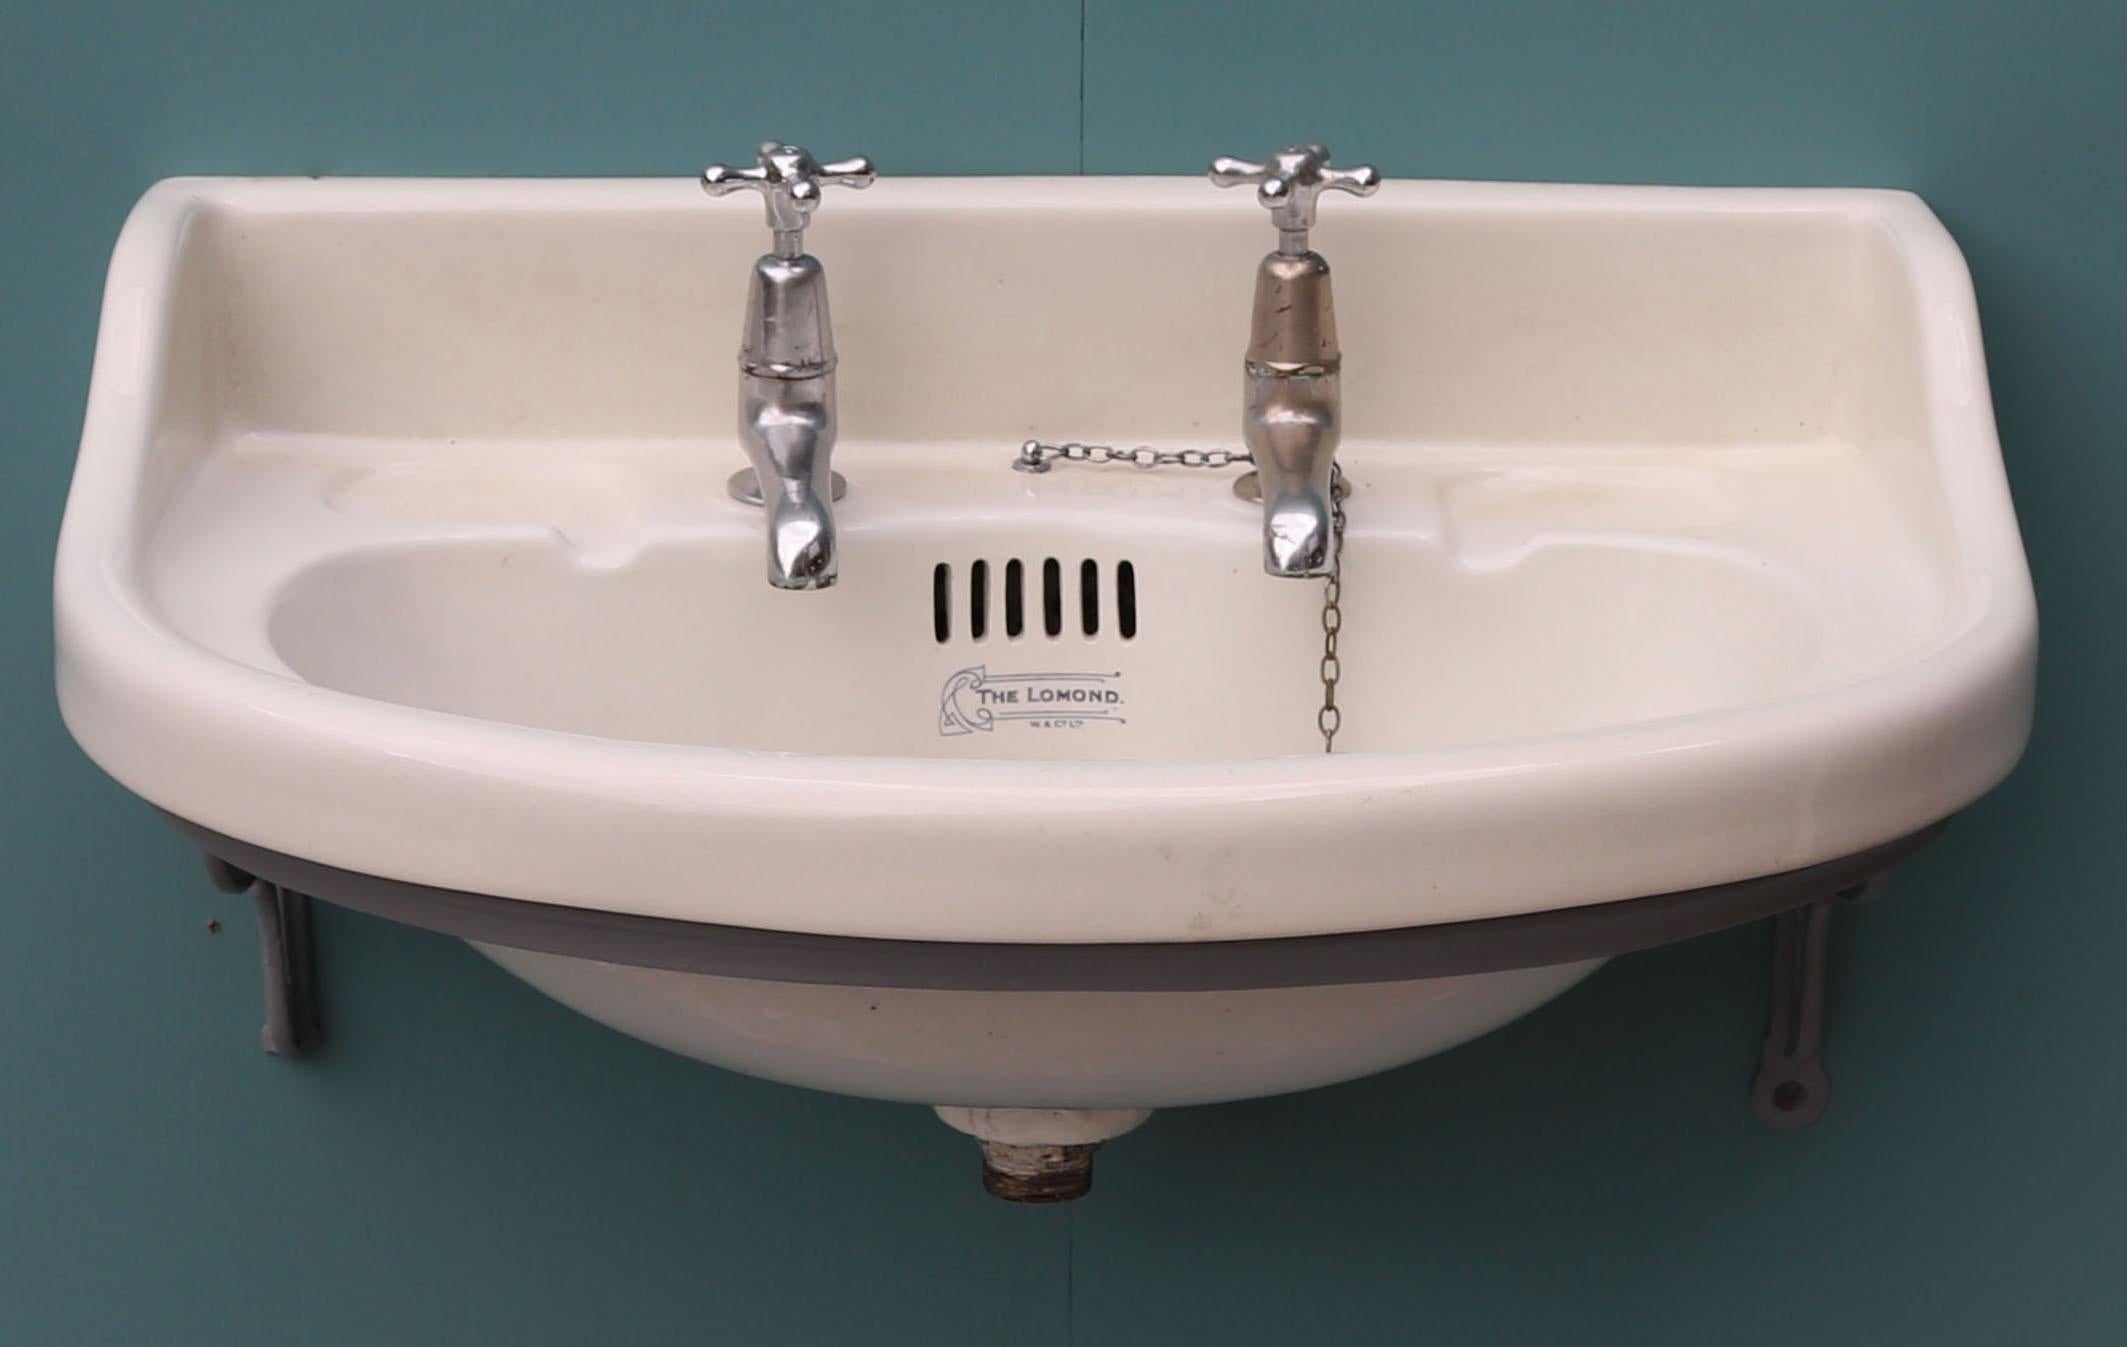 About:

A reclaimed Victorian / Edwardian style bow fronted basin. Stamped ‘The Lomond’ by W & Co Ltd. 

Condition report:

This sink has no cracks or breaks however there is some light surface crazing and discolouration. The taps are